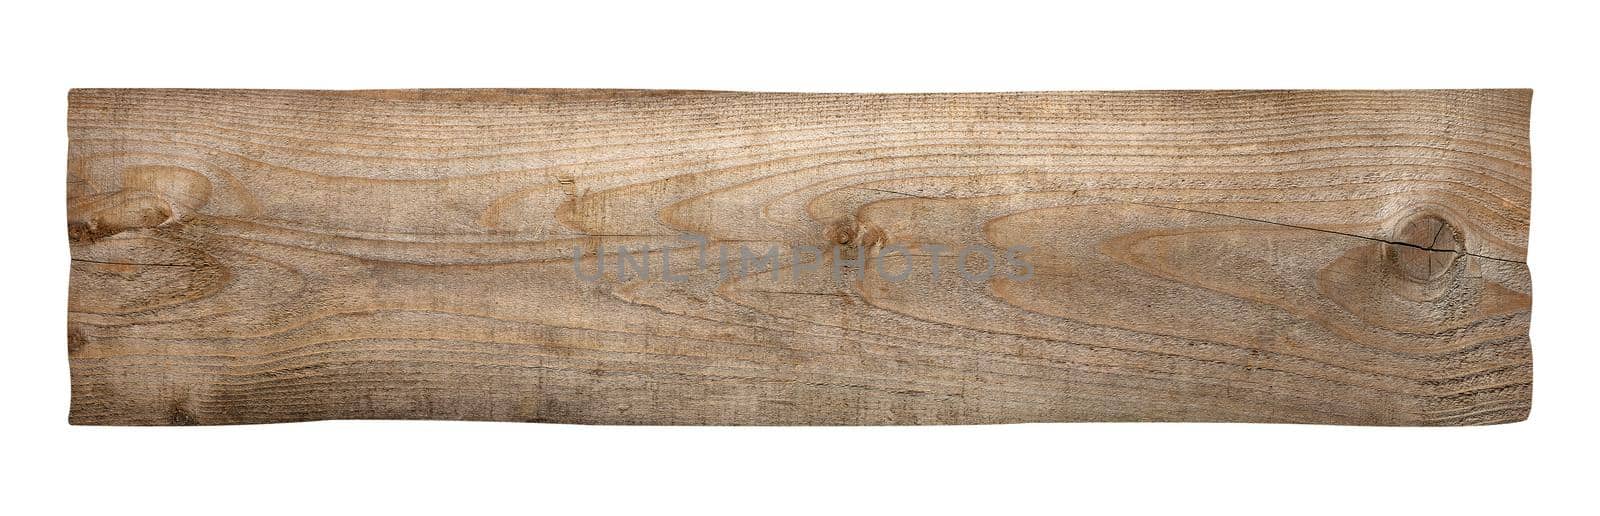 wood wooden sign background texture old by Picsfive